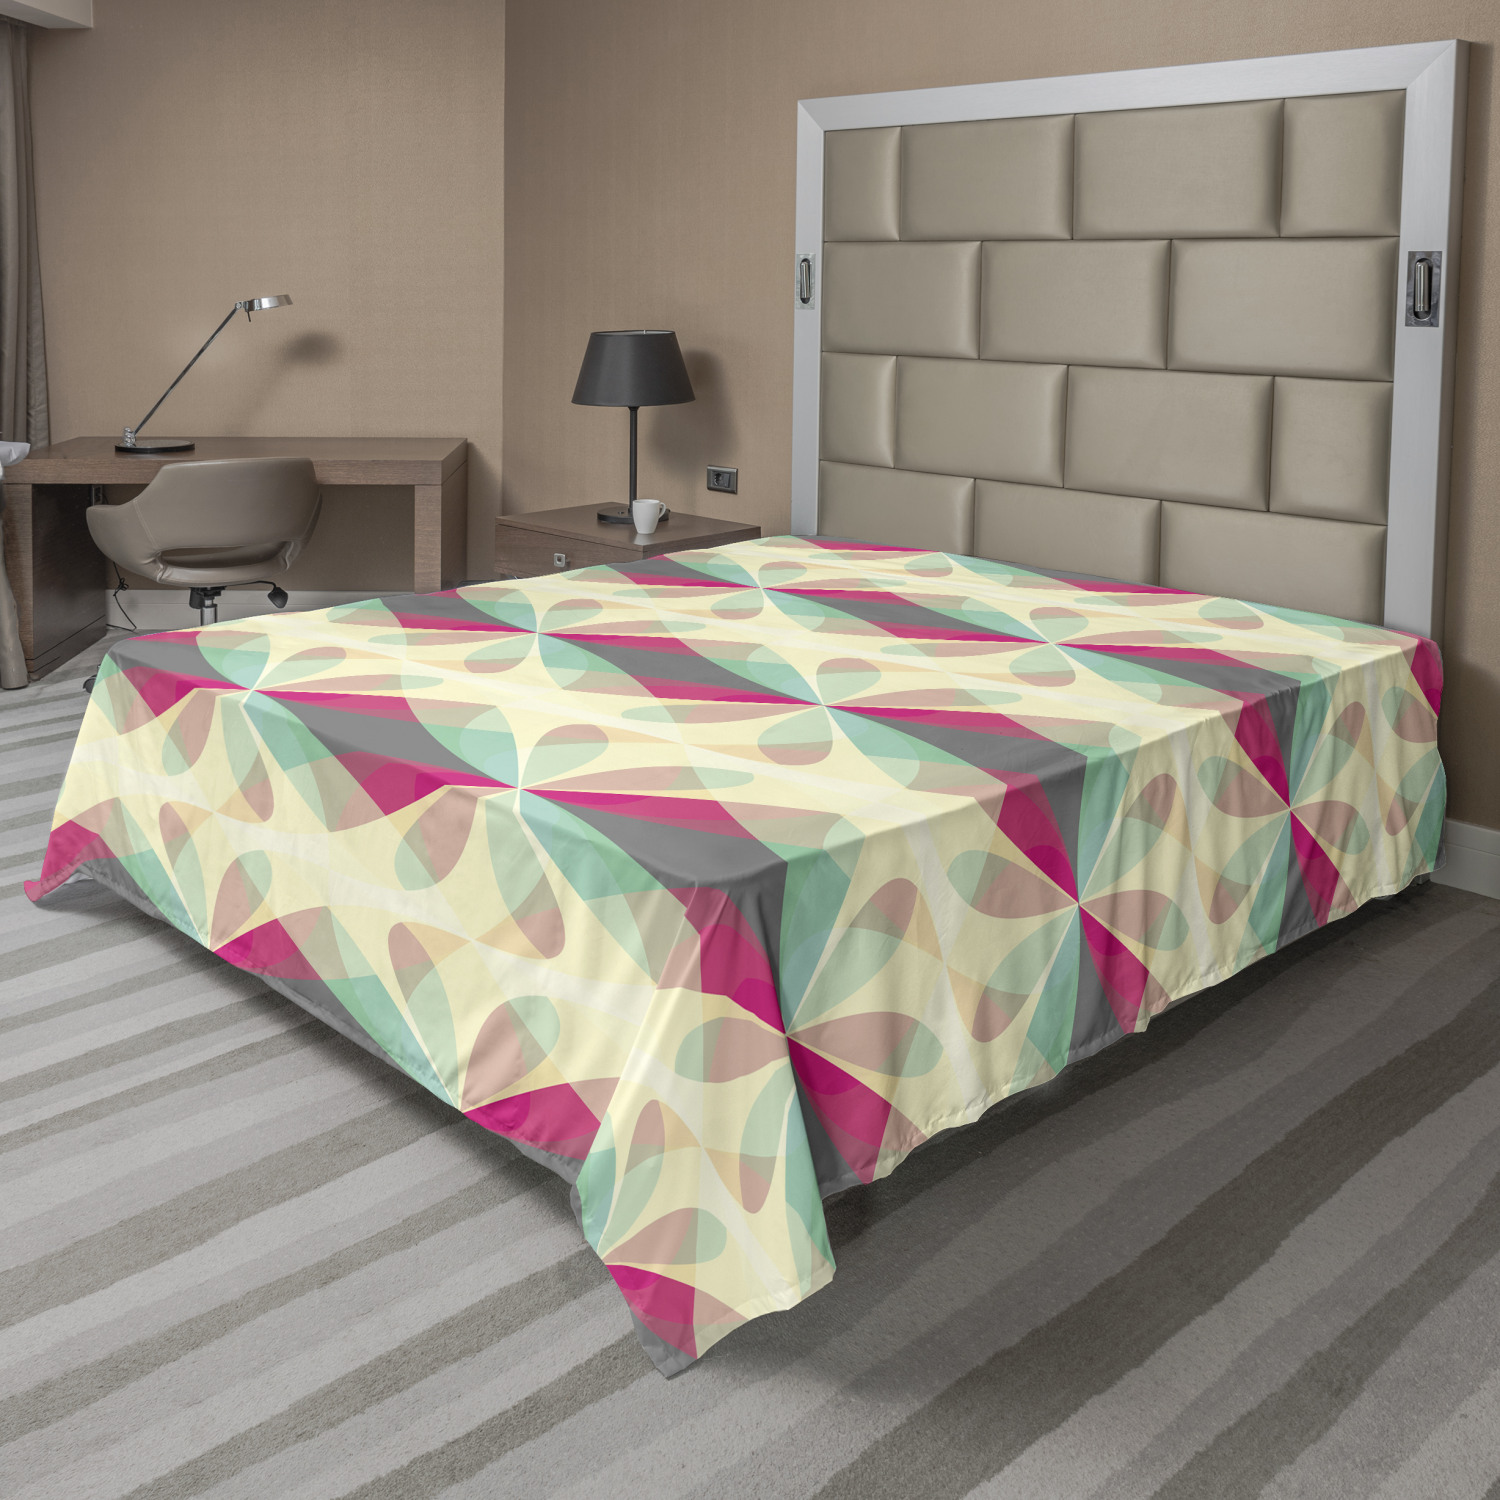 Details about   Ambesonne Abstract Bloom Flat Sheet Top Sheet Decorative Bedding 6 Sizes 